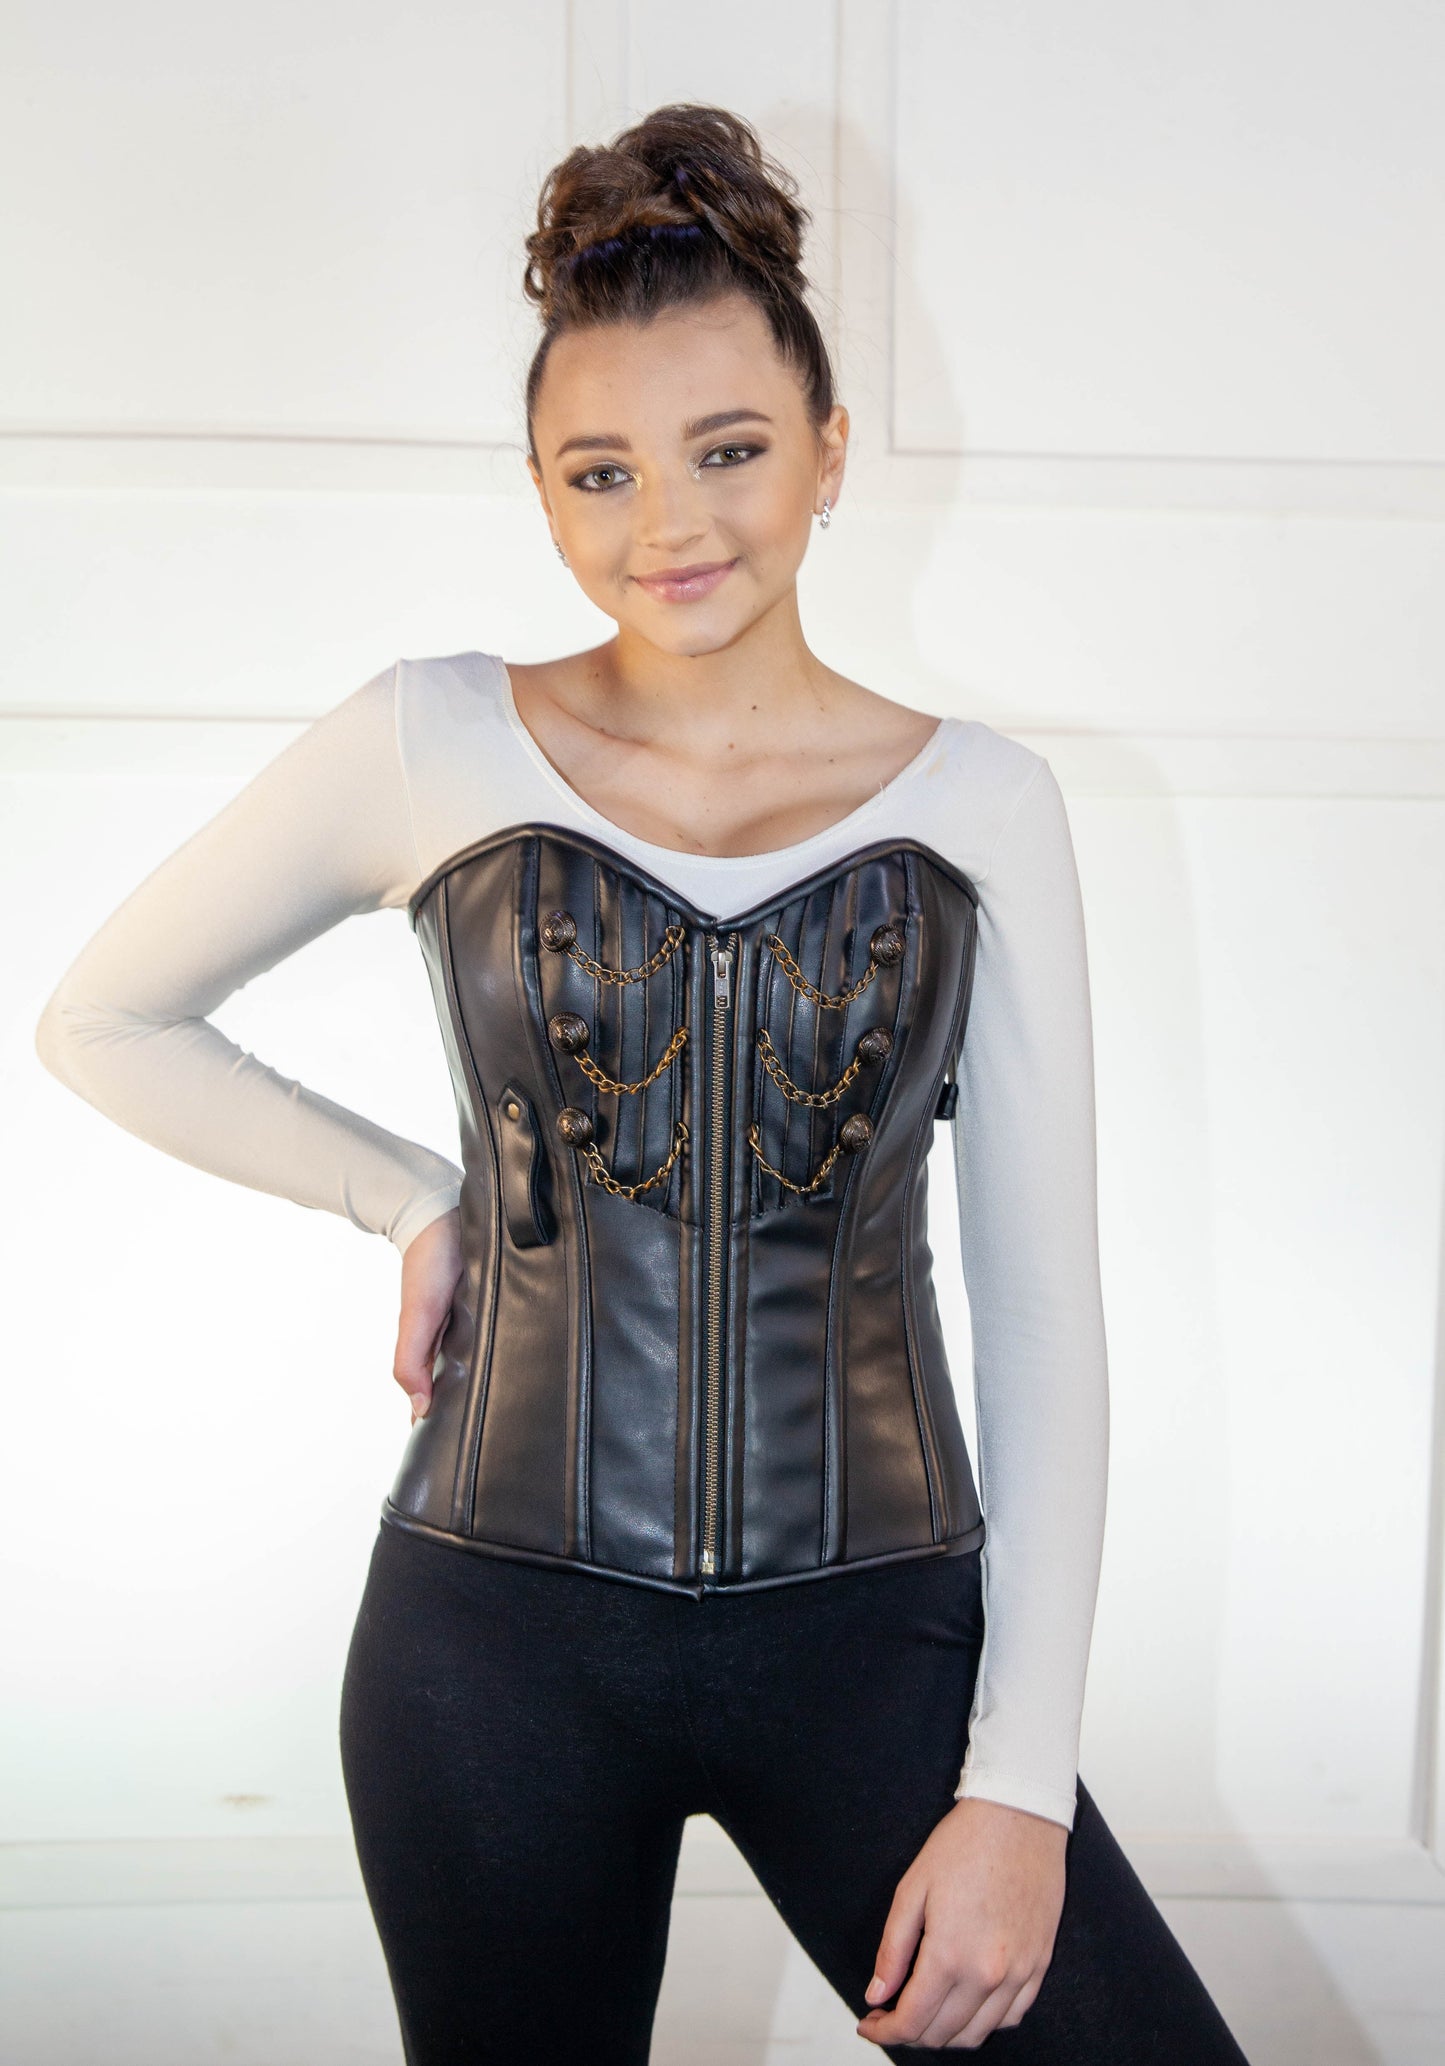 Corset - Black Leather with Chains